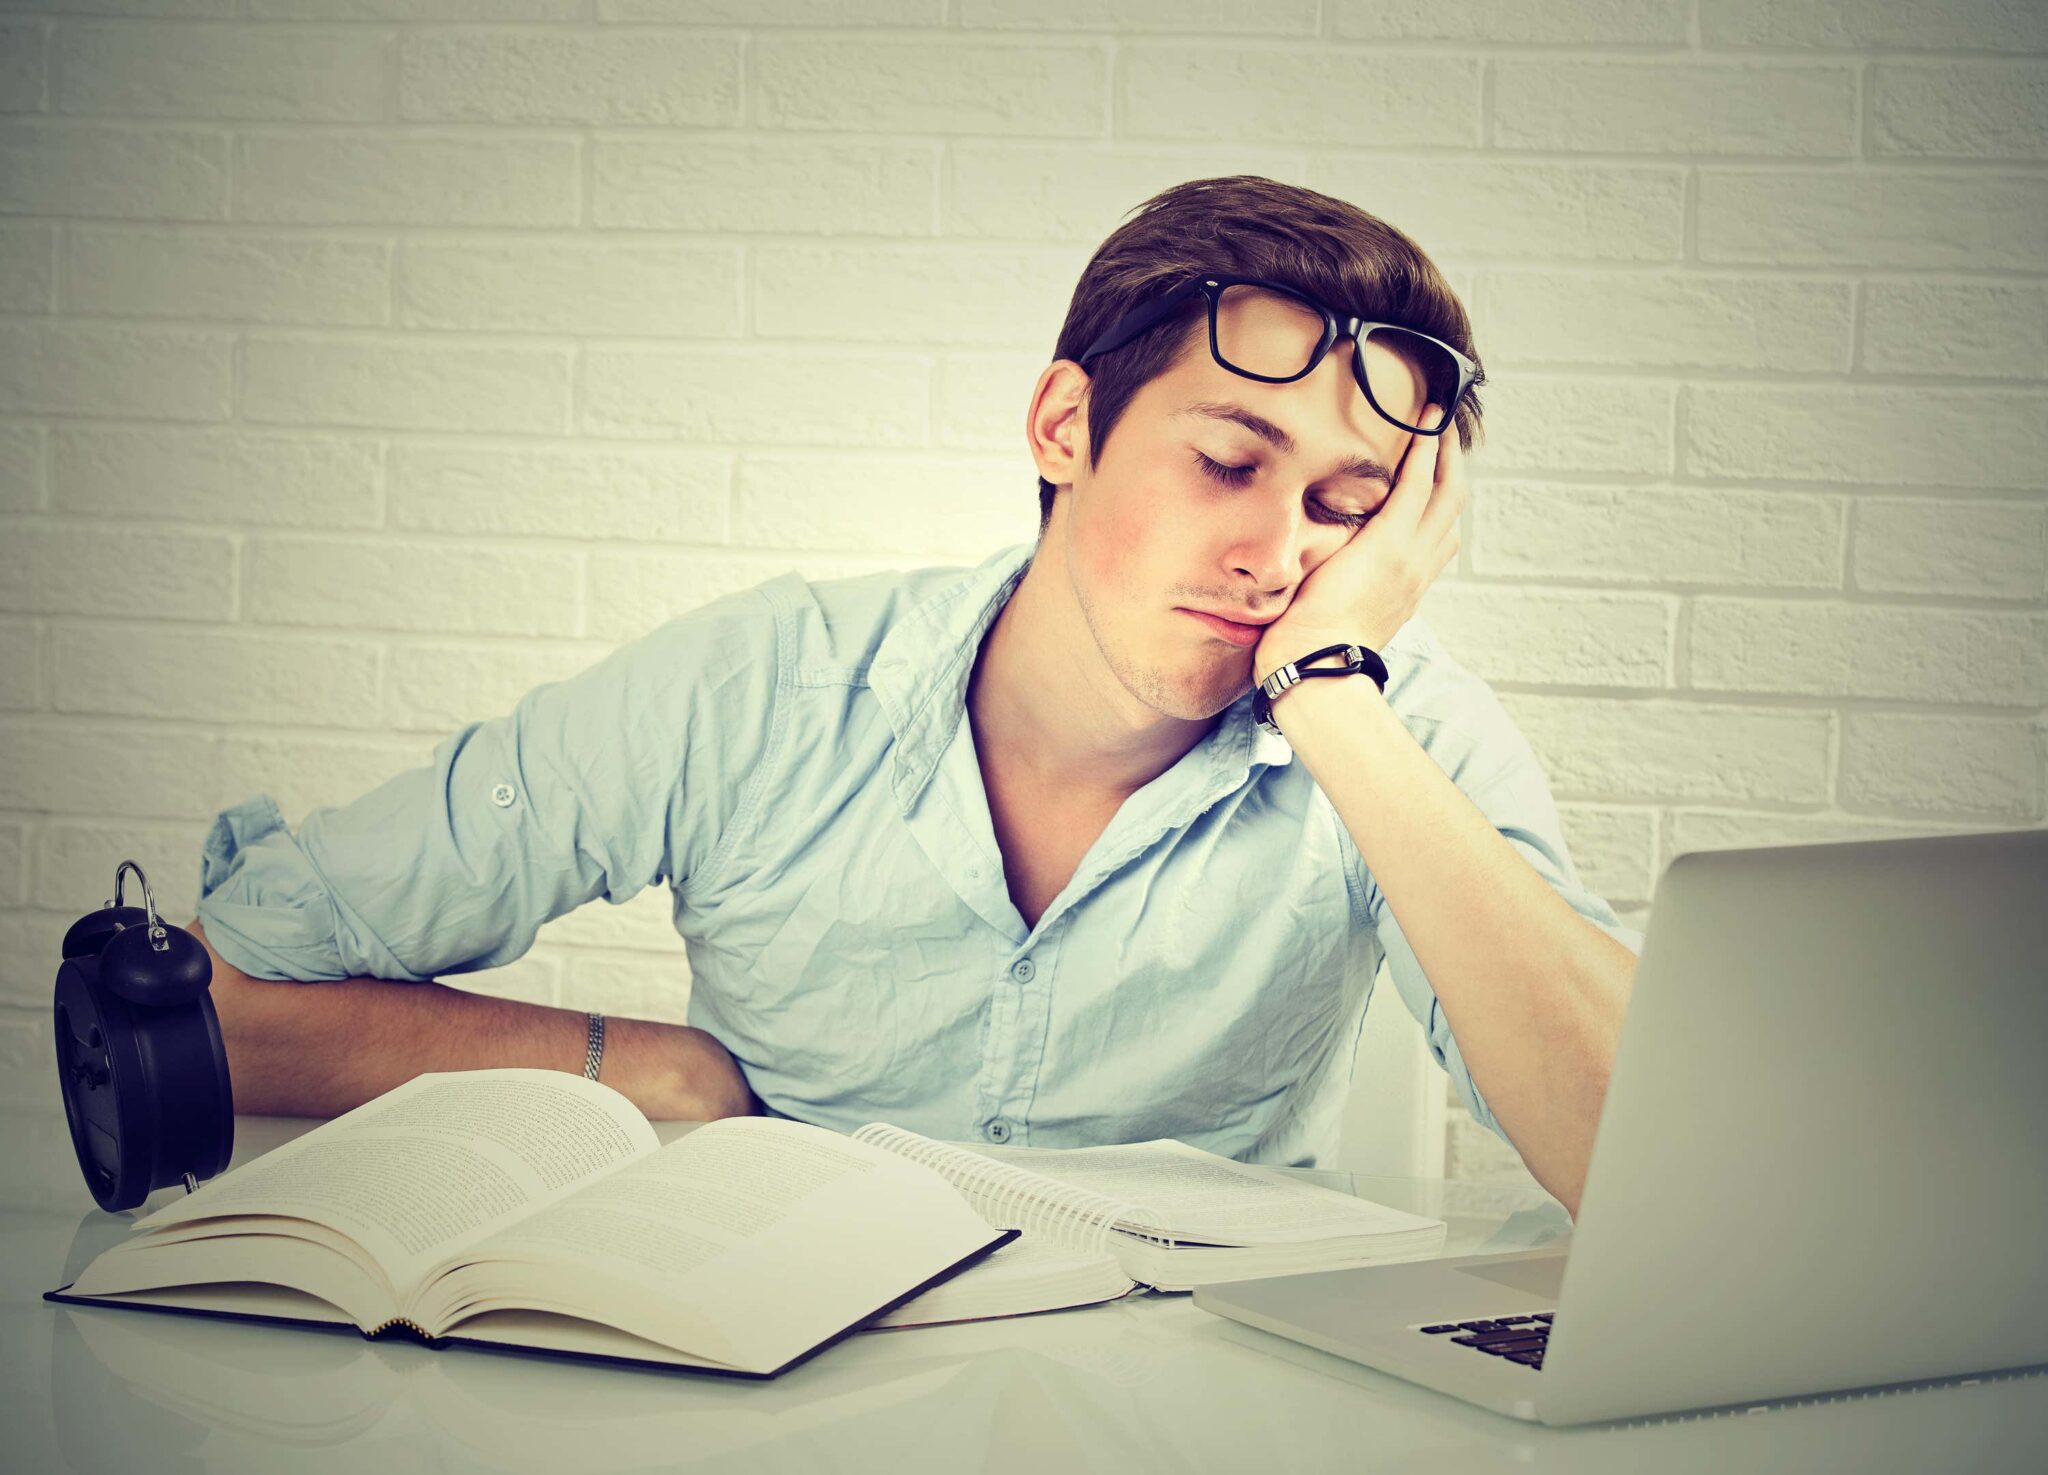 How to survive a day at work exhausted